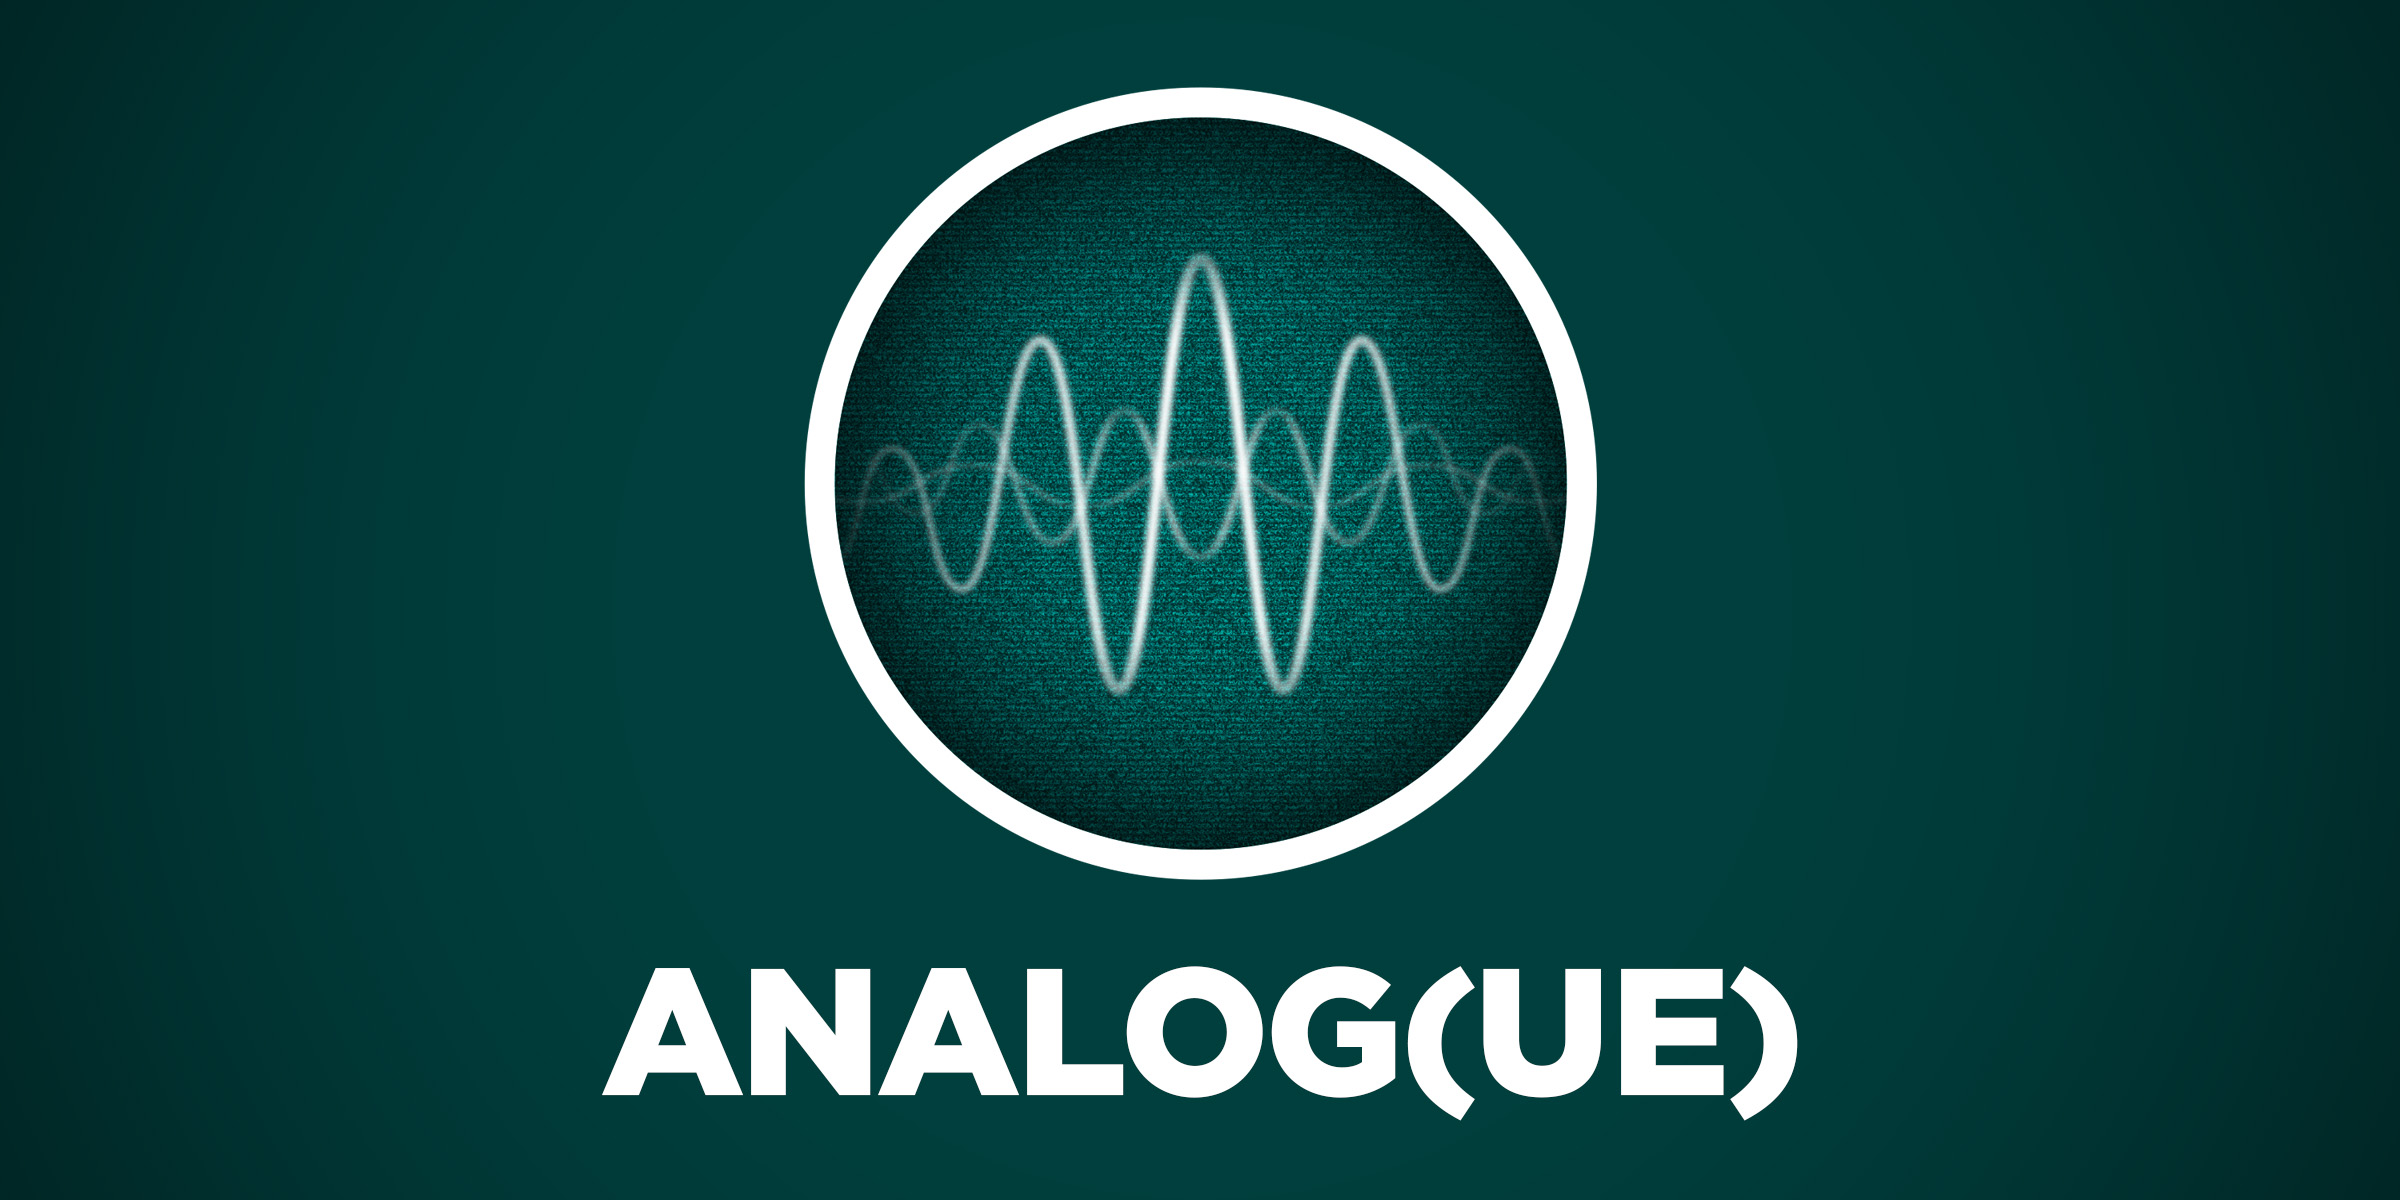 Analog(ue) #216: The Fast and the Curious